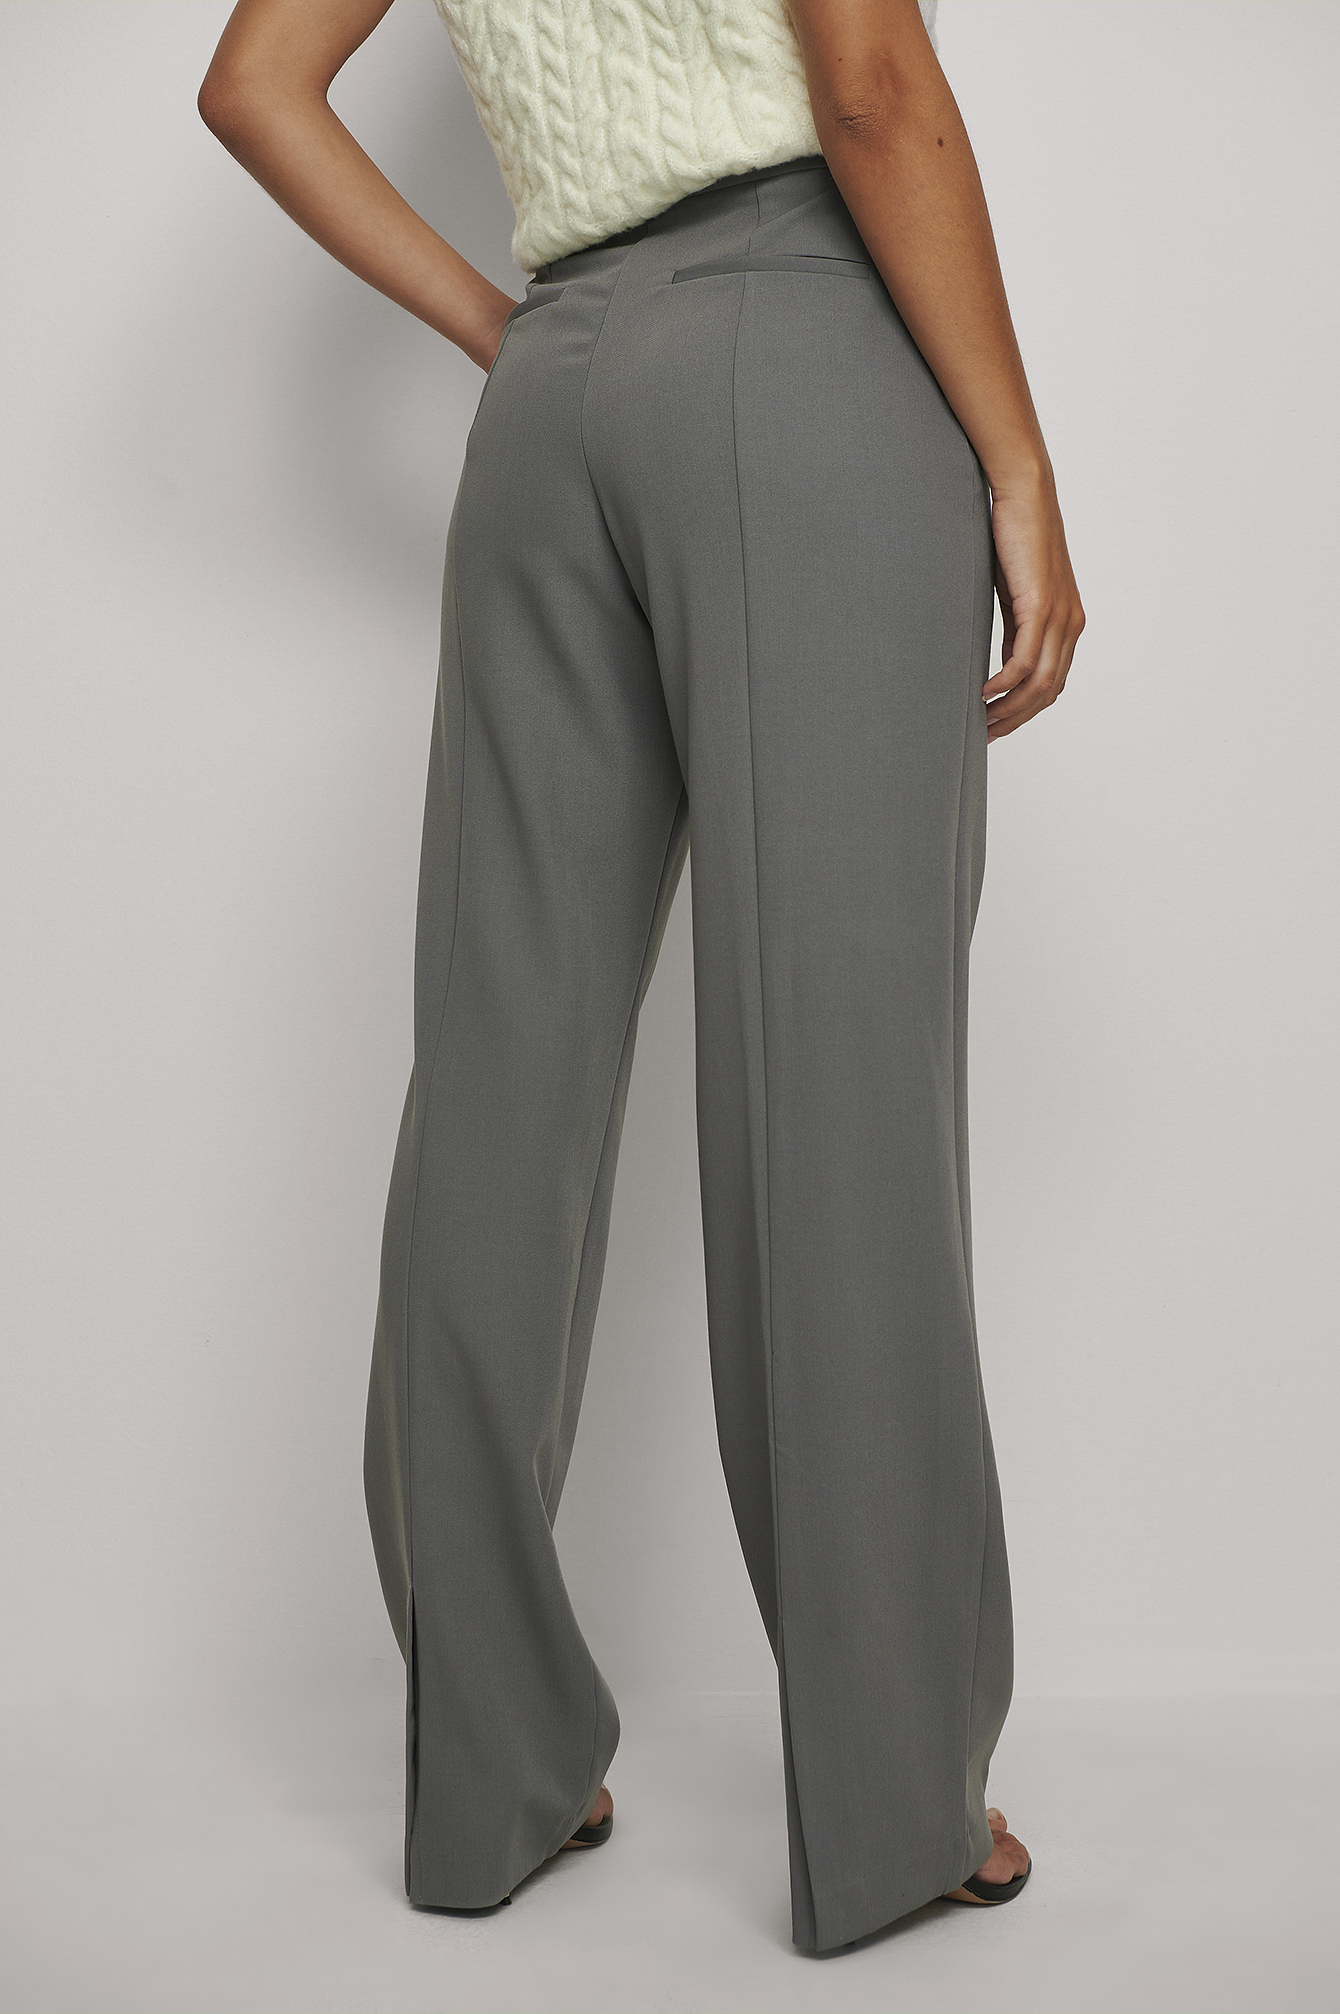 Buy Natural Grey  WideLeg Trousers Online on Brown Living  Womens trouser